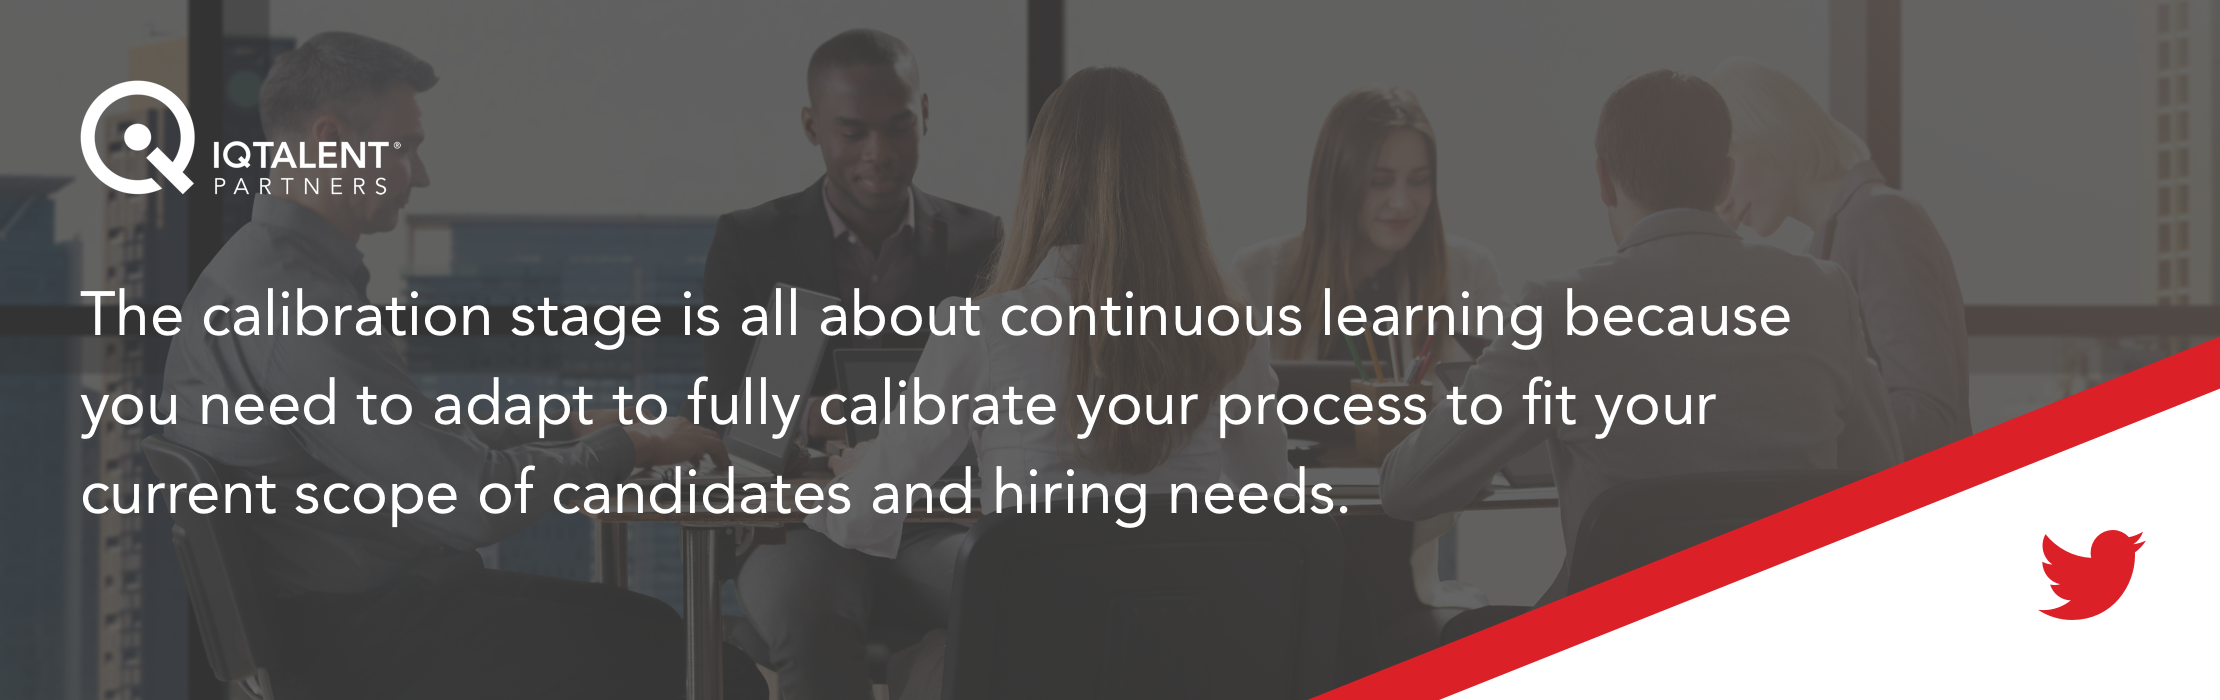 The calibration stage is all about continuous learning because you need to adapt to fully calibrate your process to fit your current scope of candidates and hiring needs.